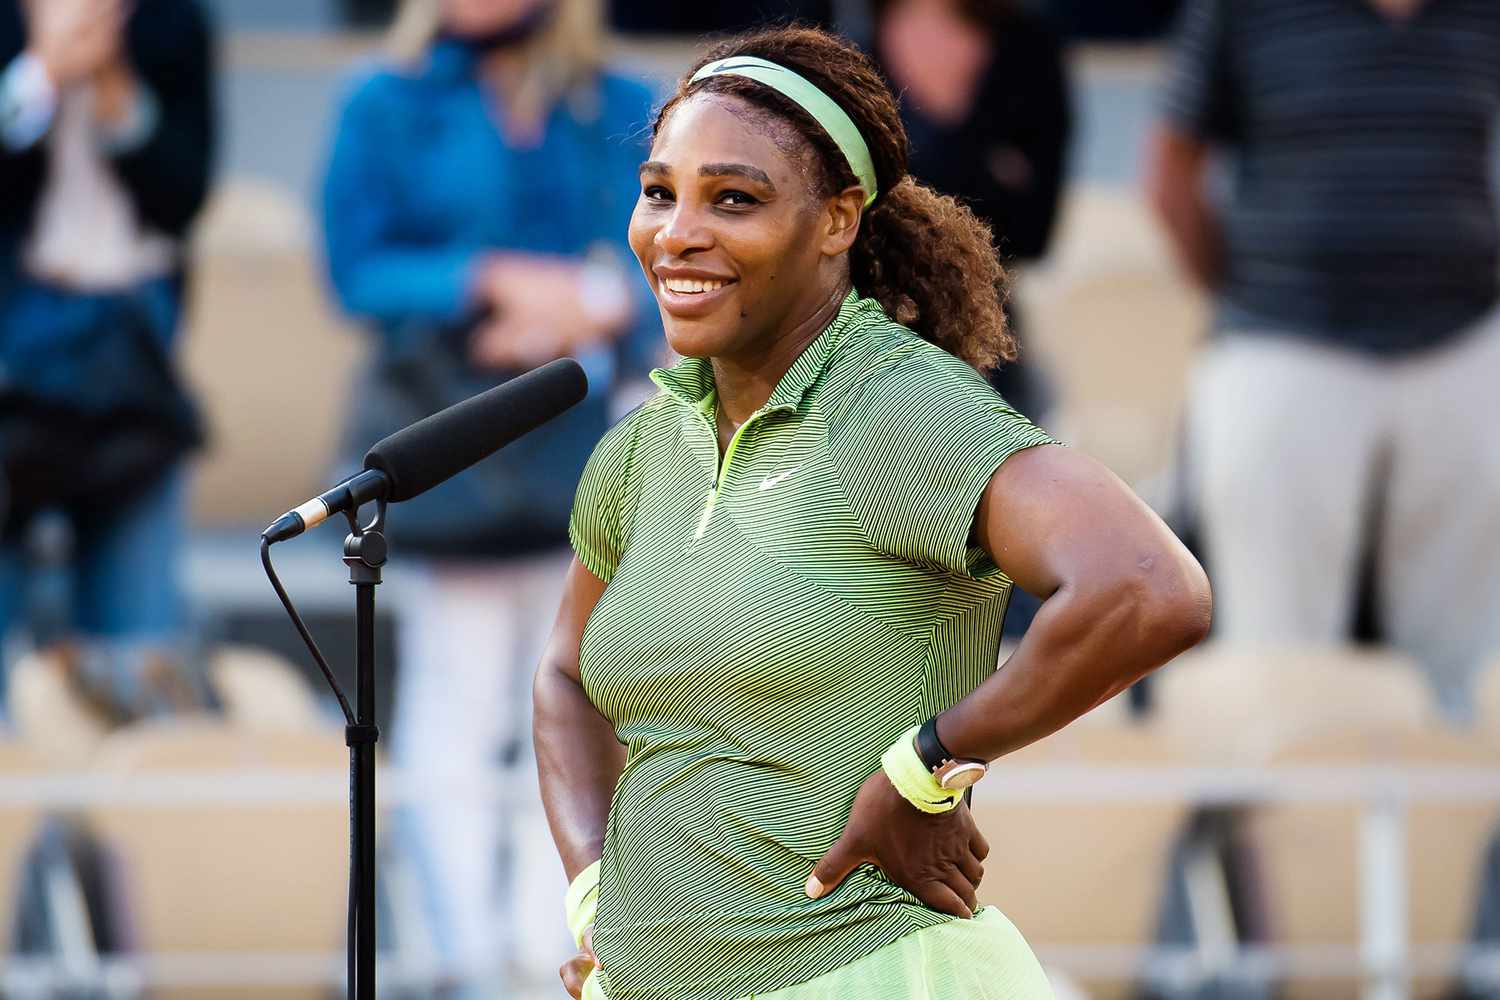 Serena Williams of the United States after winning her second-round match at the 2021 Roland Garros Grand Slam Tournament French Open Tennis